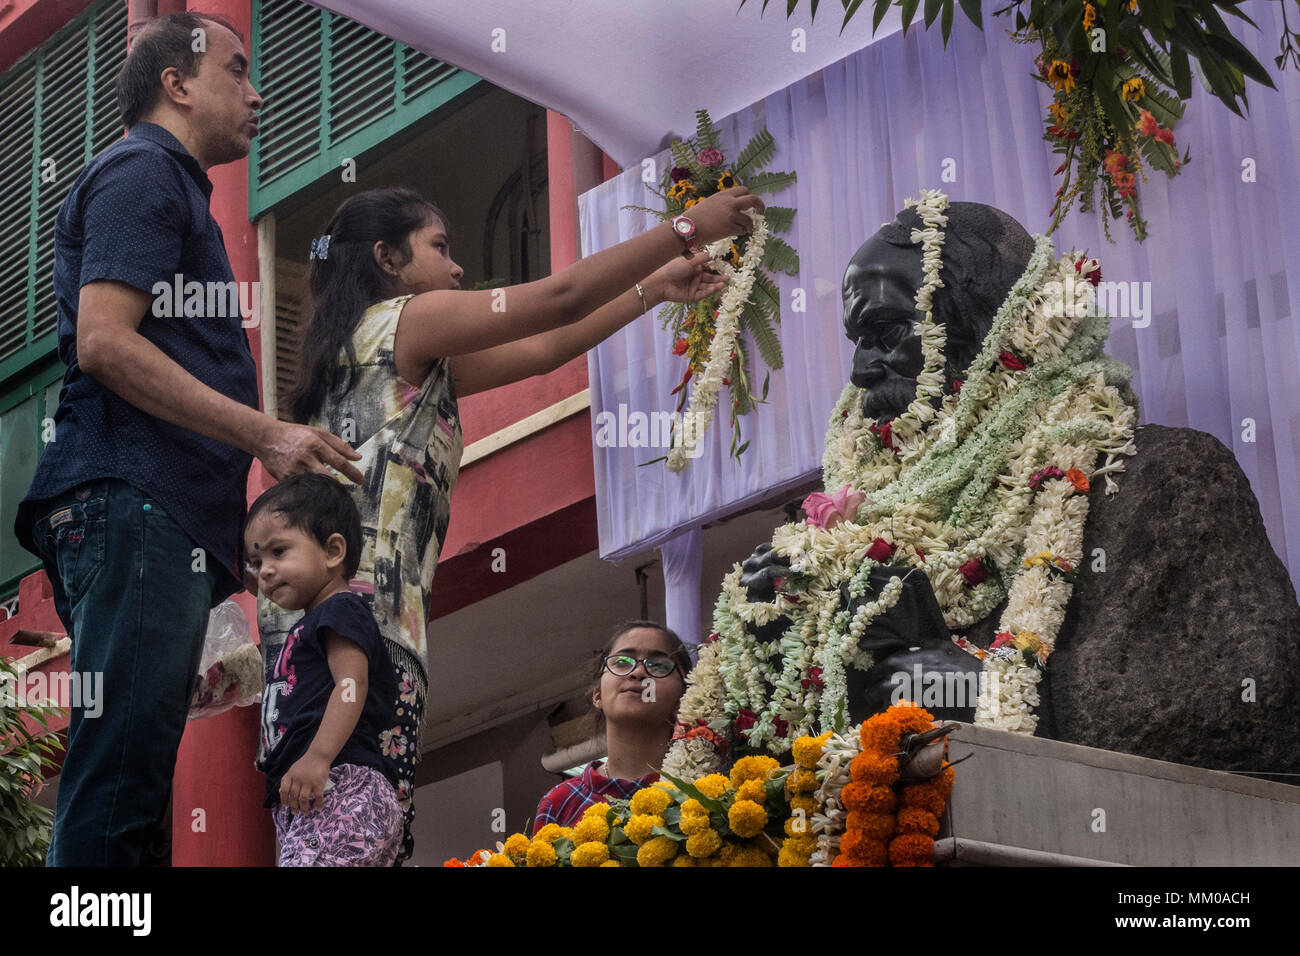 Kolkata. 9th May, 2018. Indian people put flower on the statue of Rabindranath Tagore during the celebration of his 157th birth anniversary in Kolkata, India on May 9, 2018. Tagore was the first Asian to win Nobel Prize for his collection of poems "Geetanjali" in 1913. Credit: Tumpa Mondal/Xinhua/Alamy Live News Stock Photo